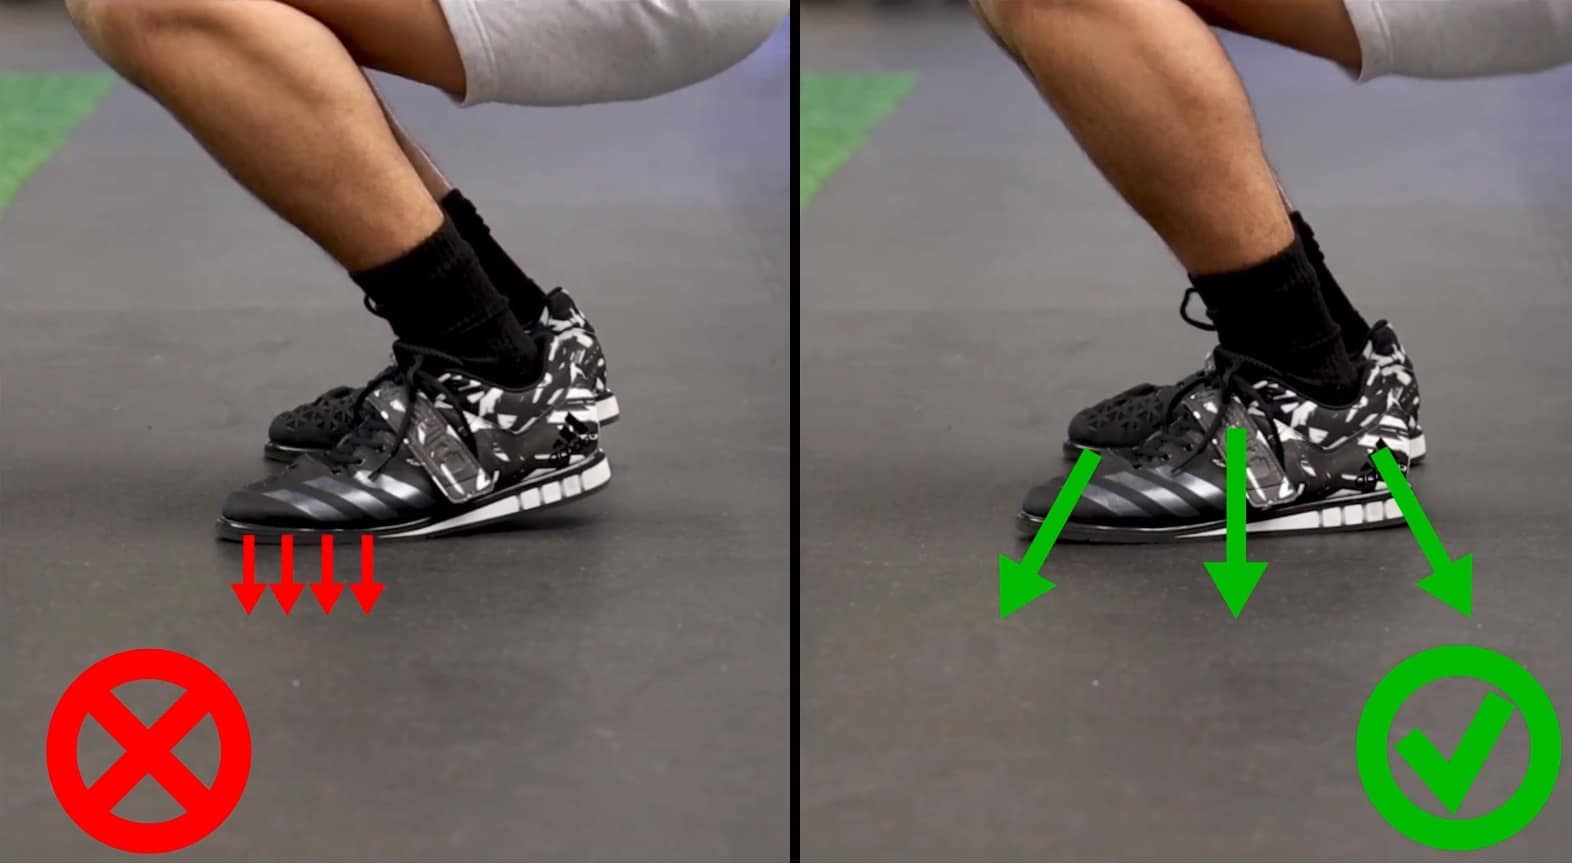 foot placement Pain in back of knee when squatting Squats pain in knee Squats pain above knee 